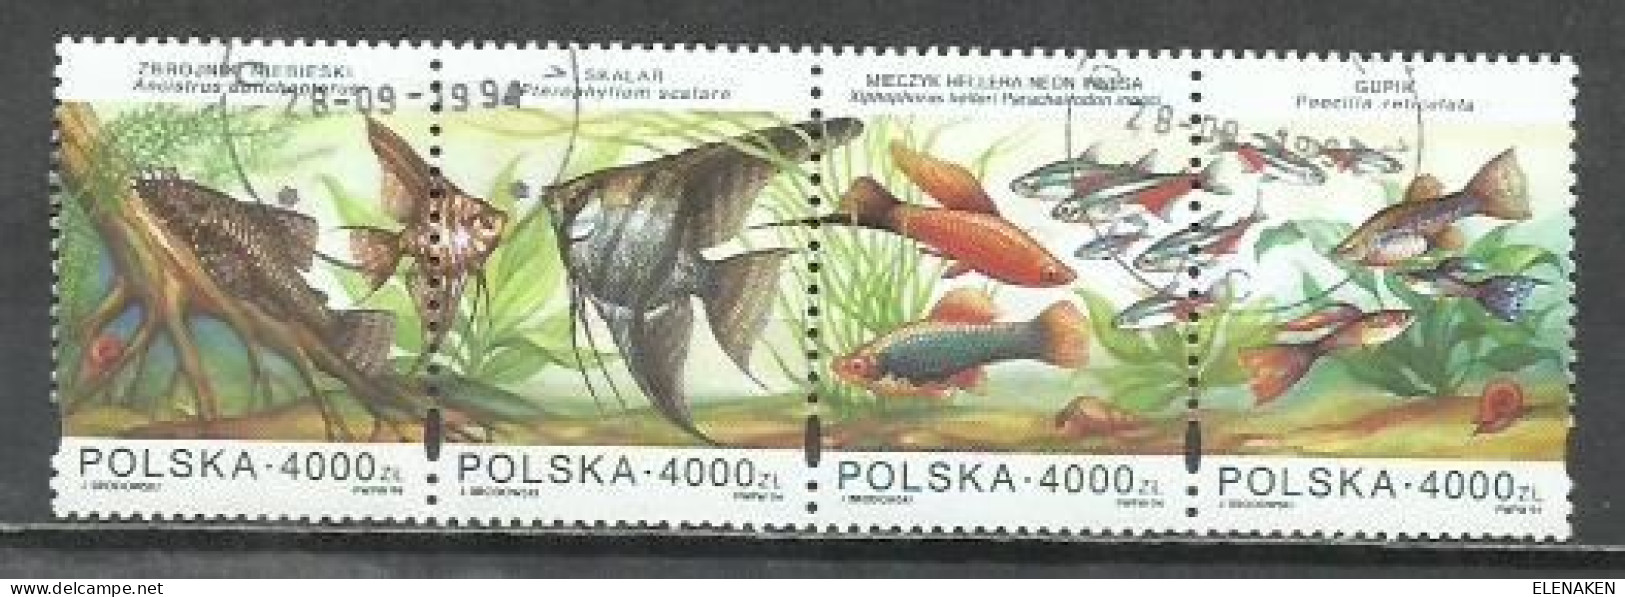 9113- SERIE COMPLETA POLONIA PECES FAUNA MARINA 1996 Nº 3388/3393 MUY BONITOS. - Used Stamps